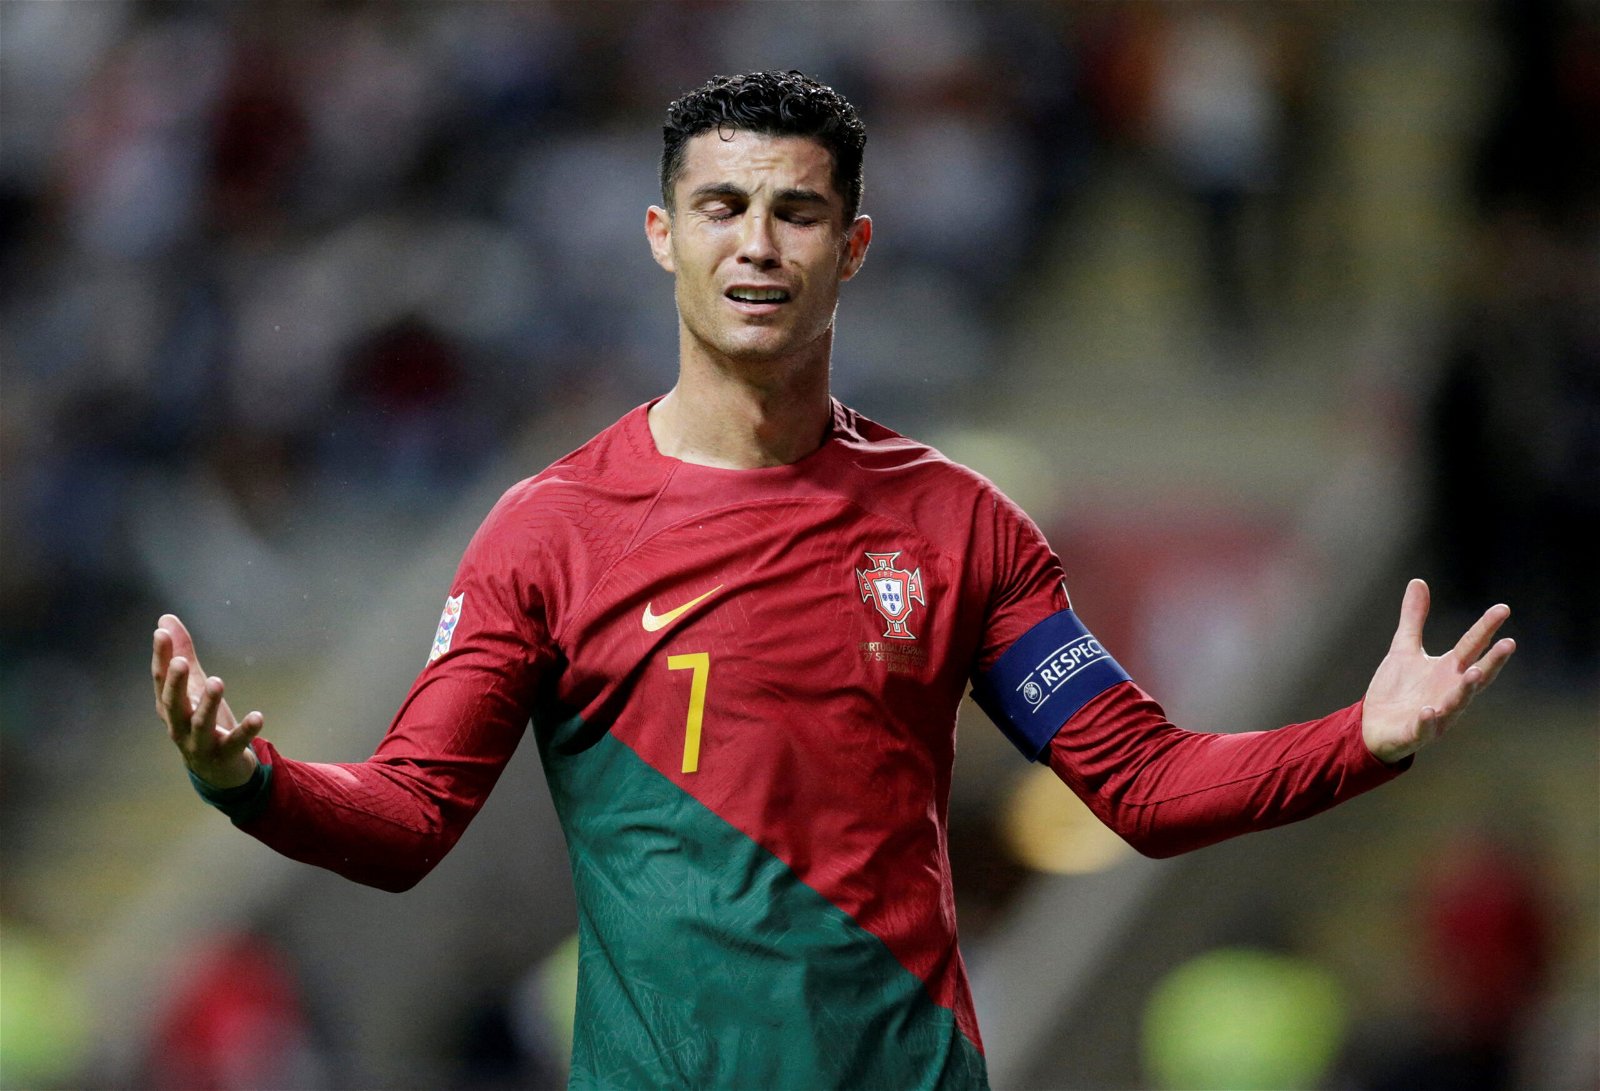 Cristiano Ronaldo reveals he turned down €350m offer to play in Saudi Arabia